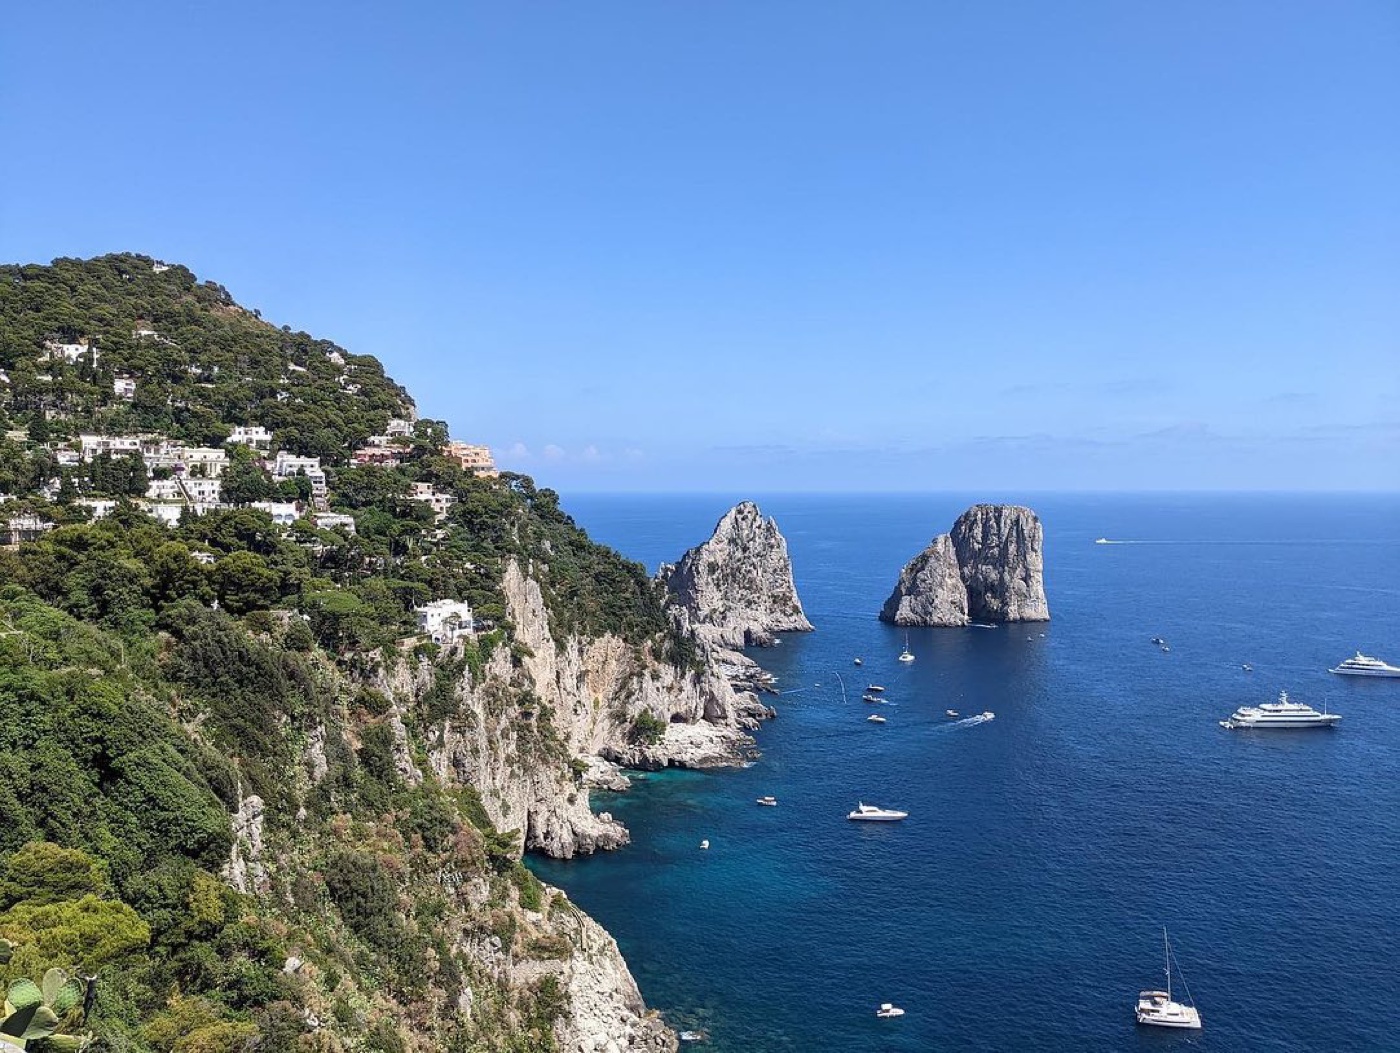 10-day Italy itinerary for Florence, Amalfi, and Rome